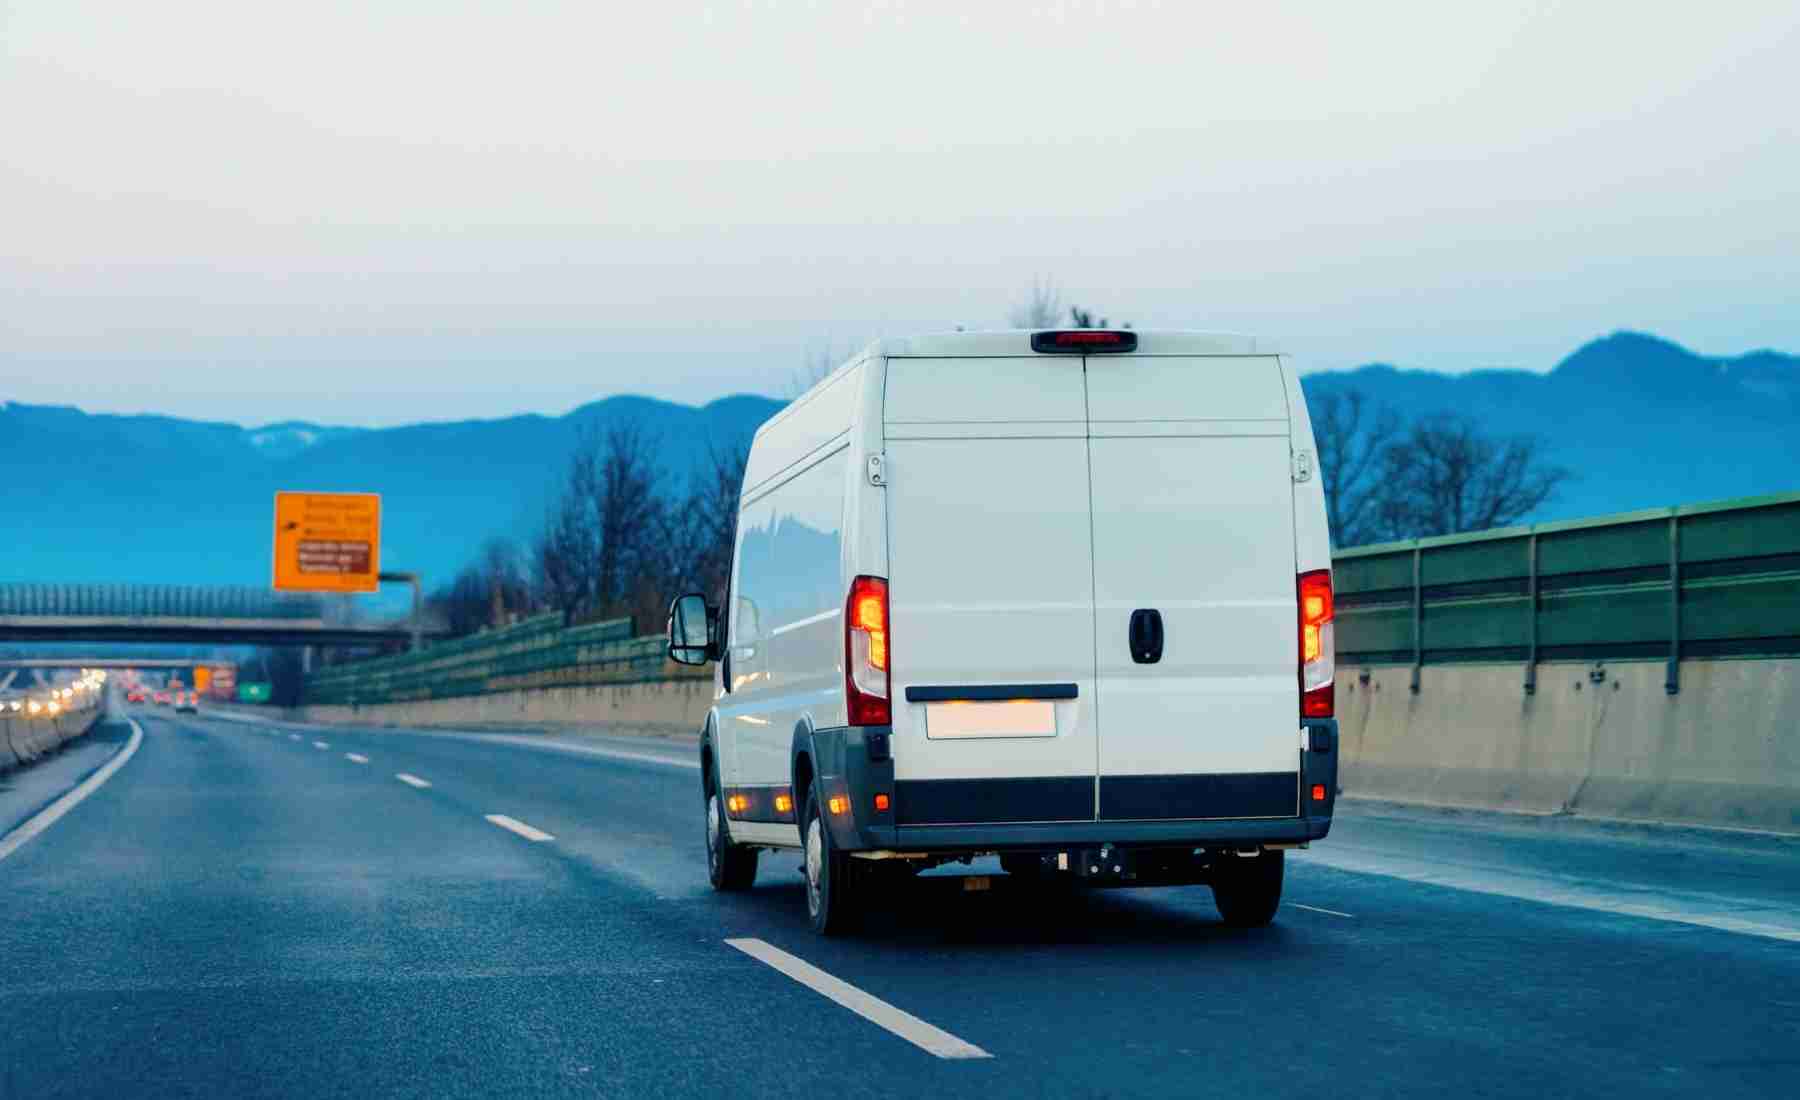 How to Make Money with a Van (2022 Guide)